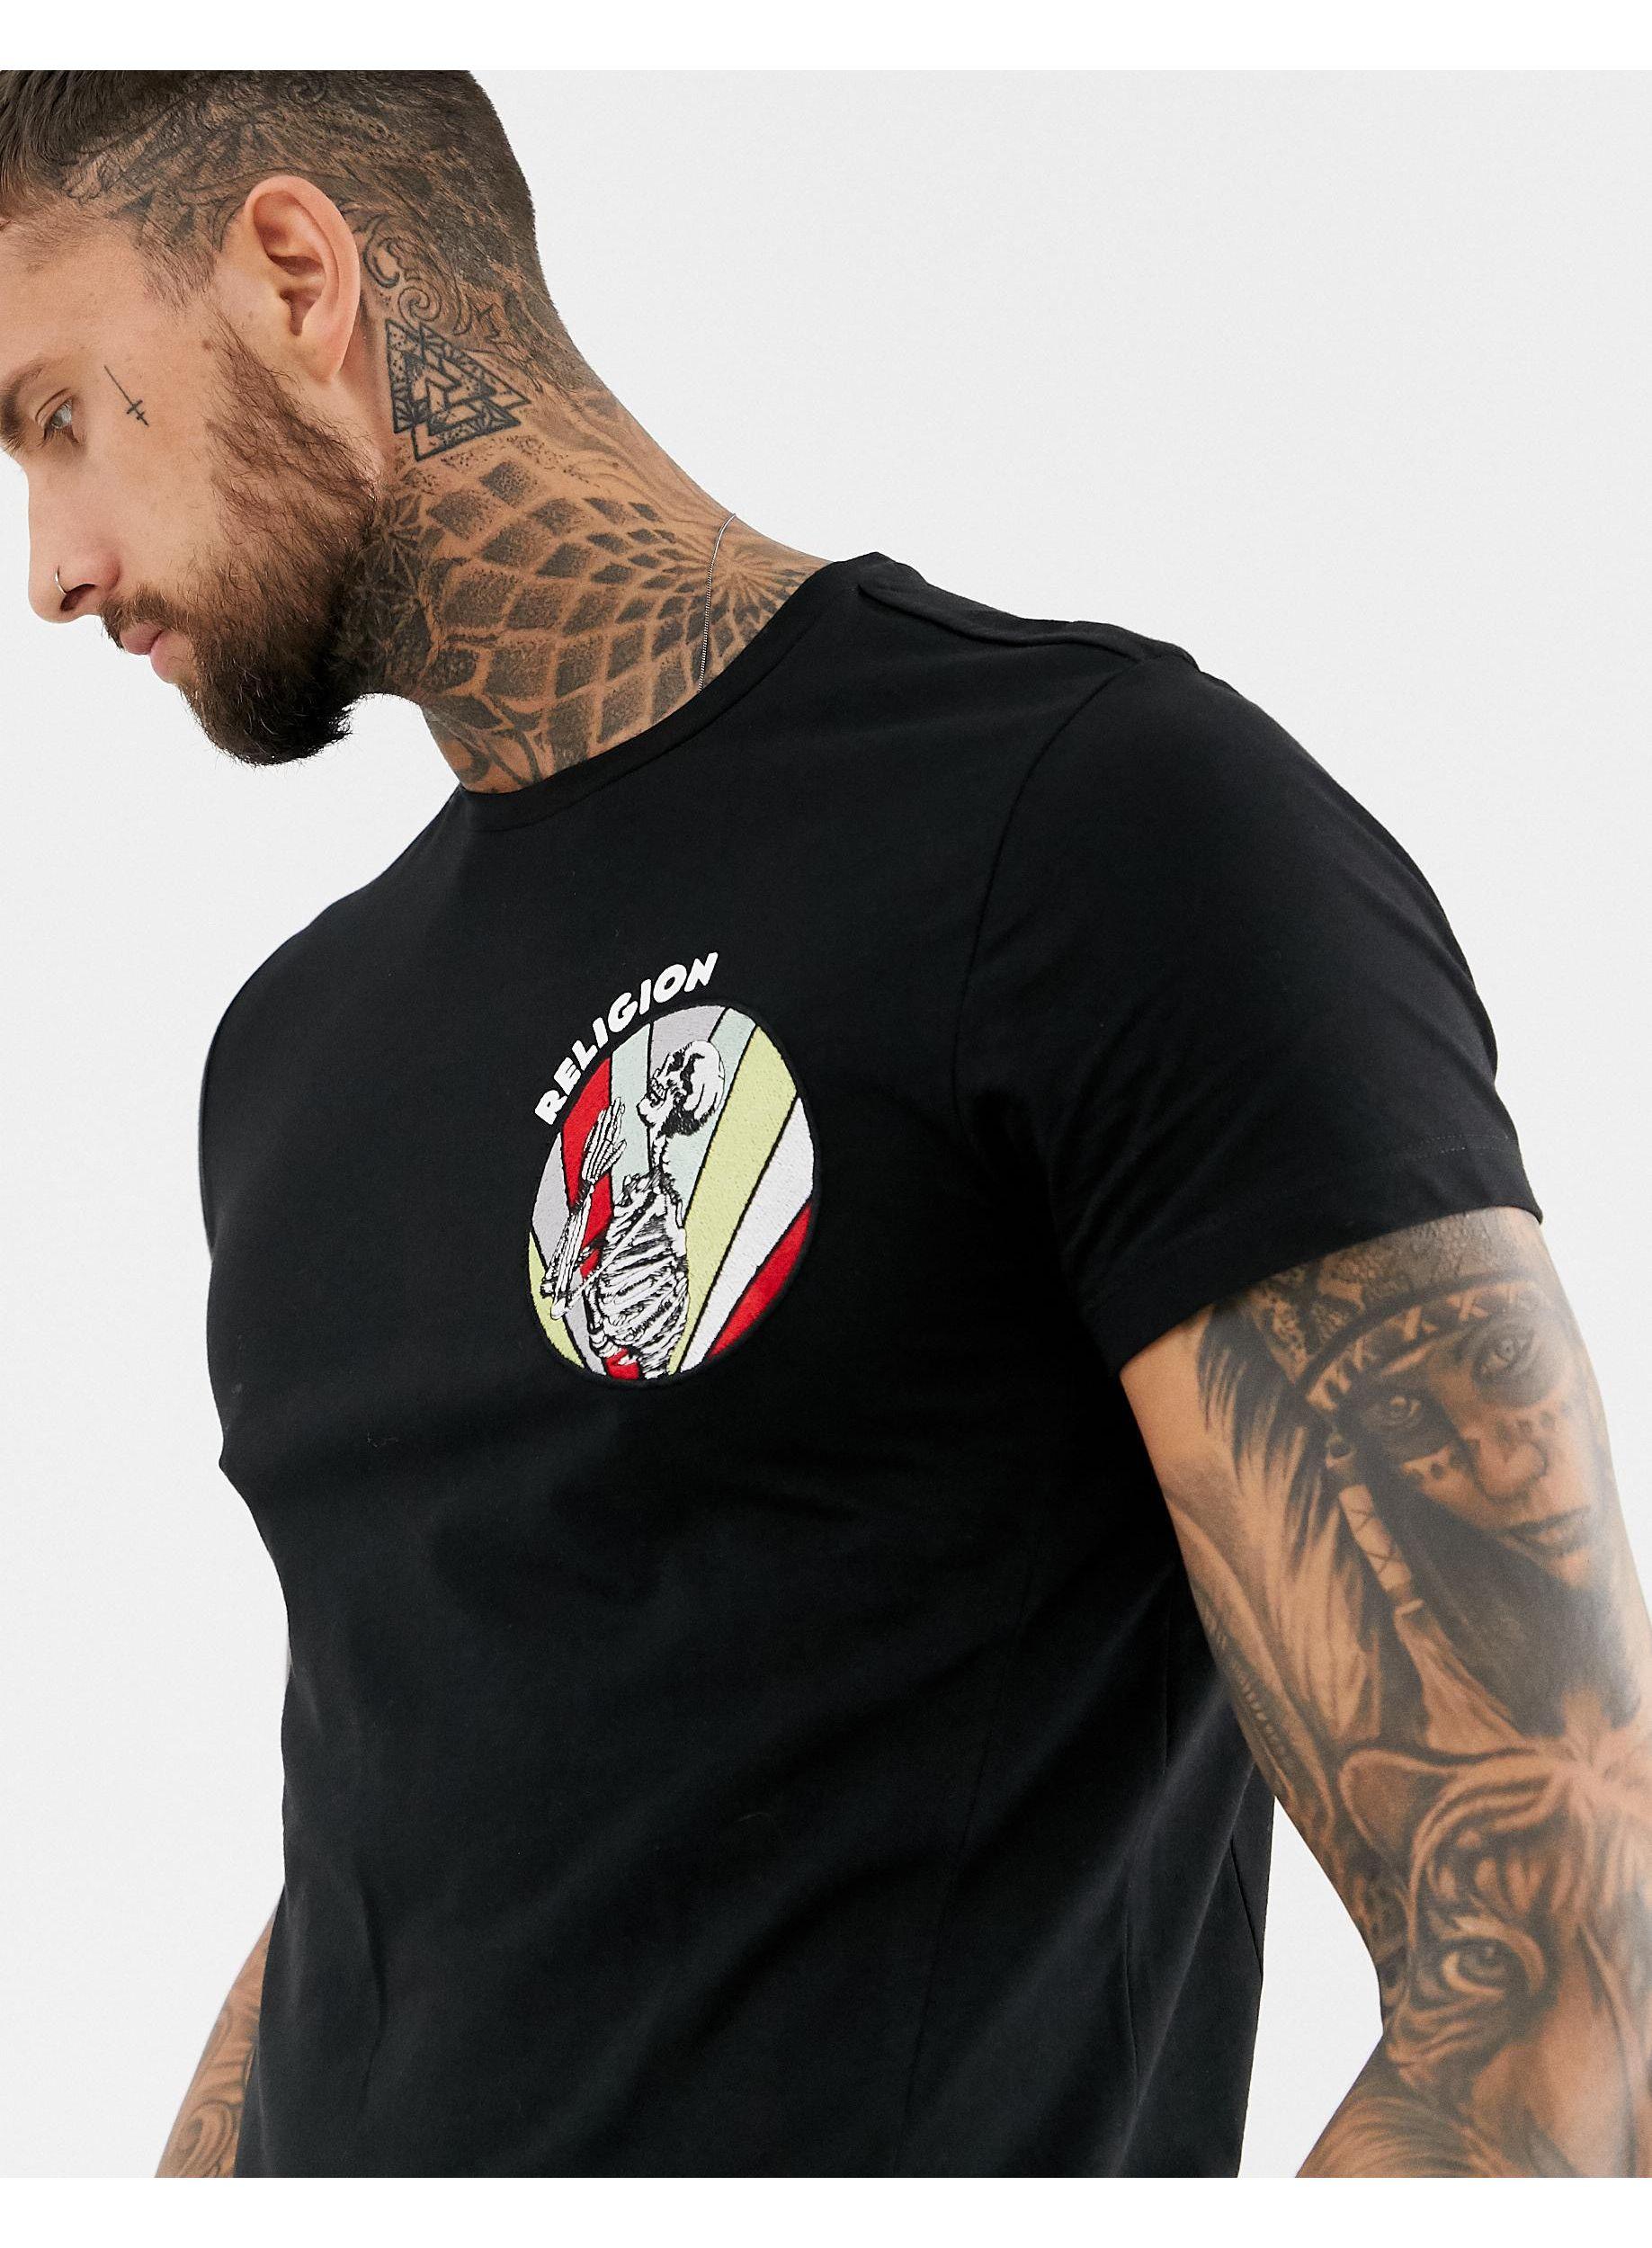 religion muscle fit t shirt